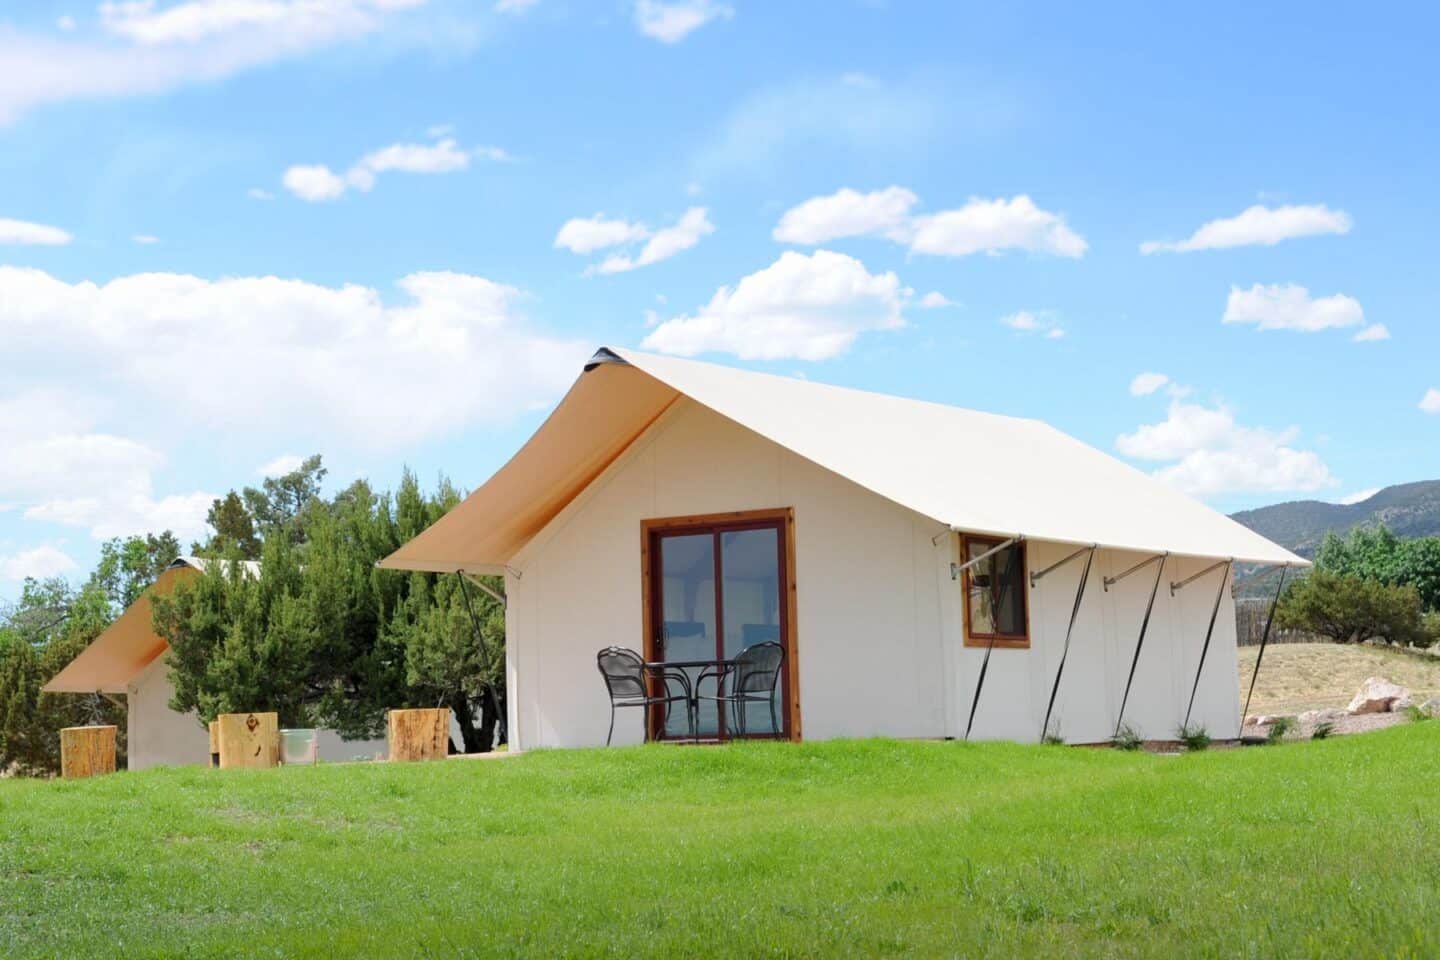 Glamping Tent at Royal Gorge, a family glamping site in Colorado